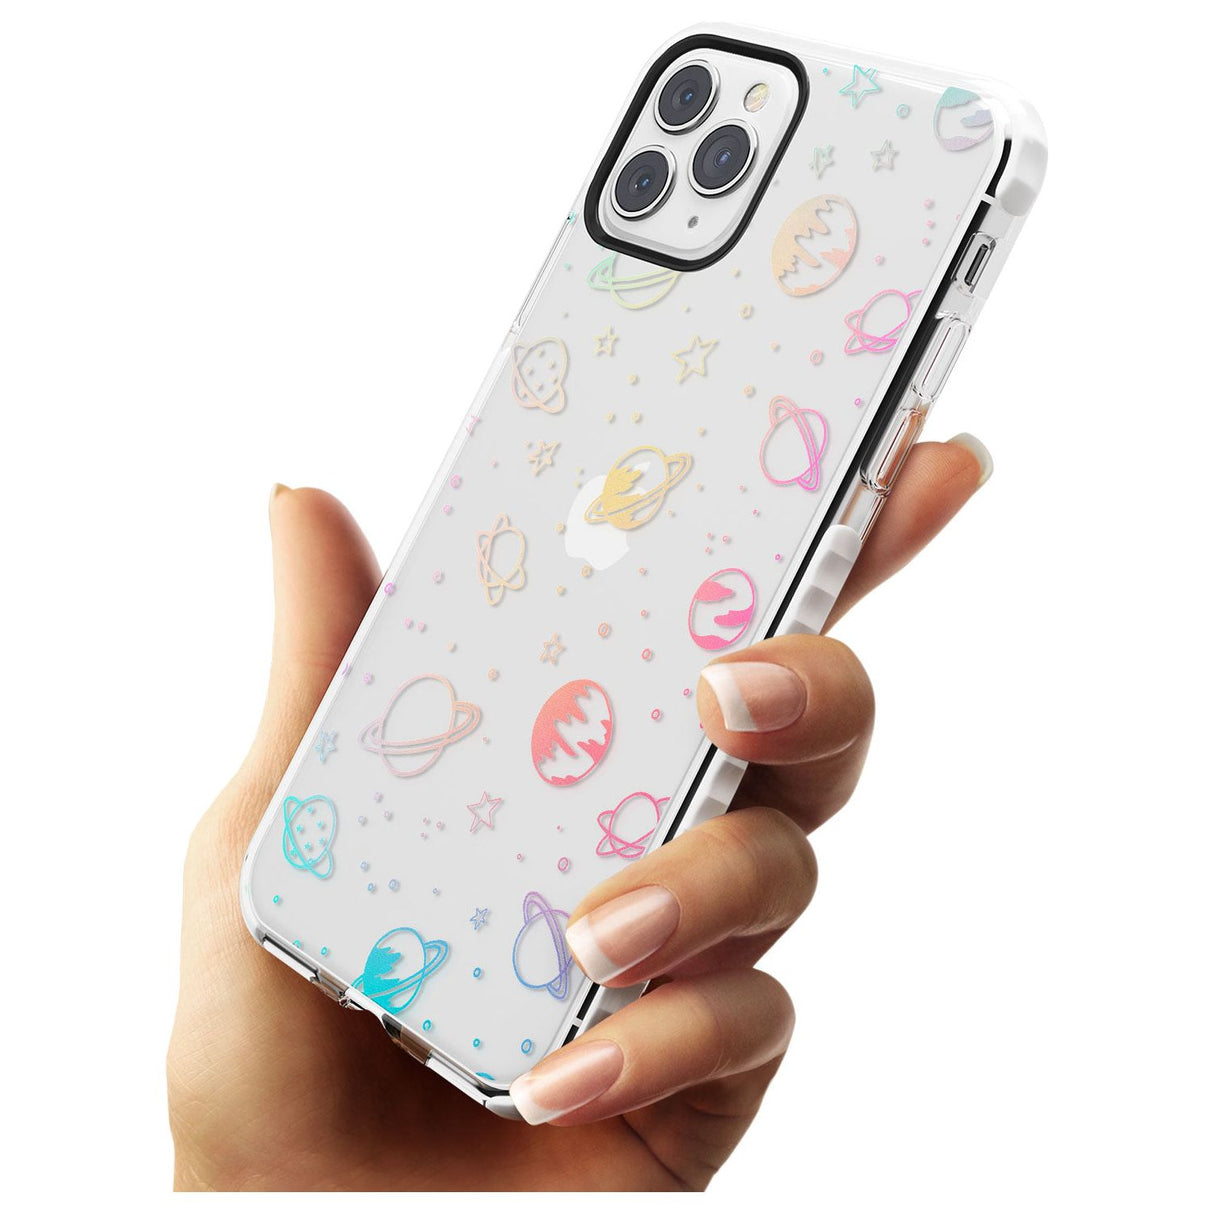 Outer Space Outlines: Pastels on Clear Slim TPU Phone Case for iPhone 11 Pro Max